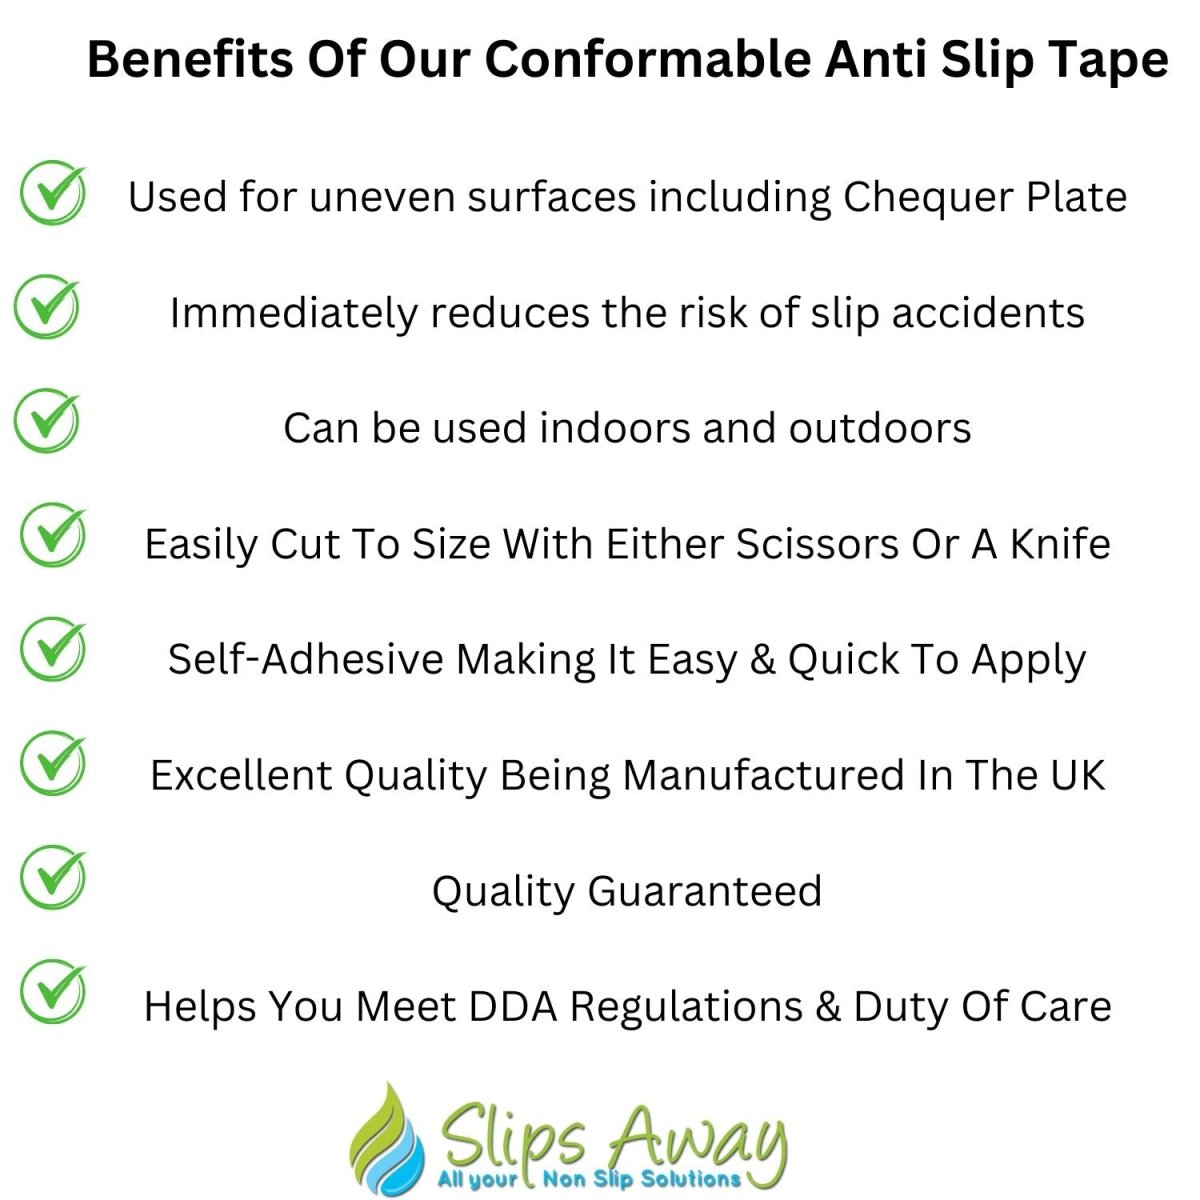 Conformable Traction Grade Anti Slip Tape Rolls - Slips Away - Conformable Anti-Slip Tape - H3406N-Conformable-Safety-Grip-Black-25mm-1-1 -